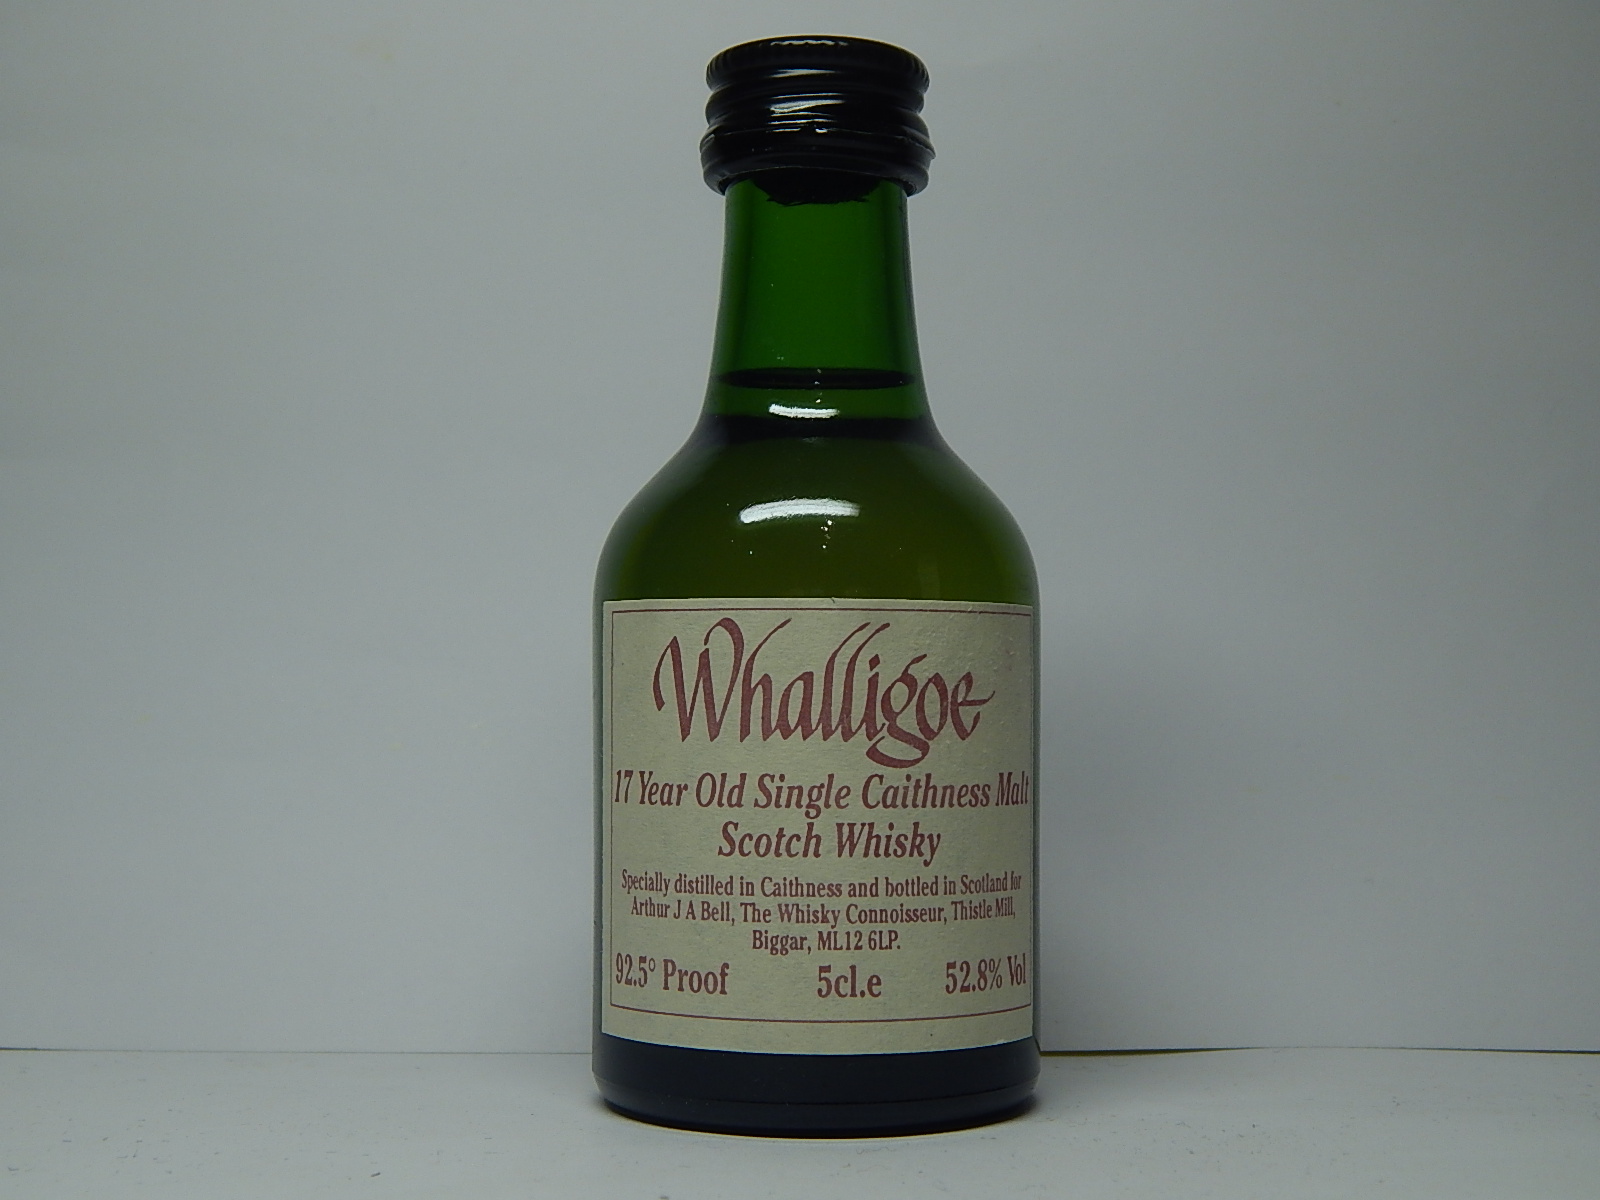 WHALLIGOE Old SCMSW 17yo "Whisky Connoisseur" 5cl.e 52,8%Vol 92,5´Proof